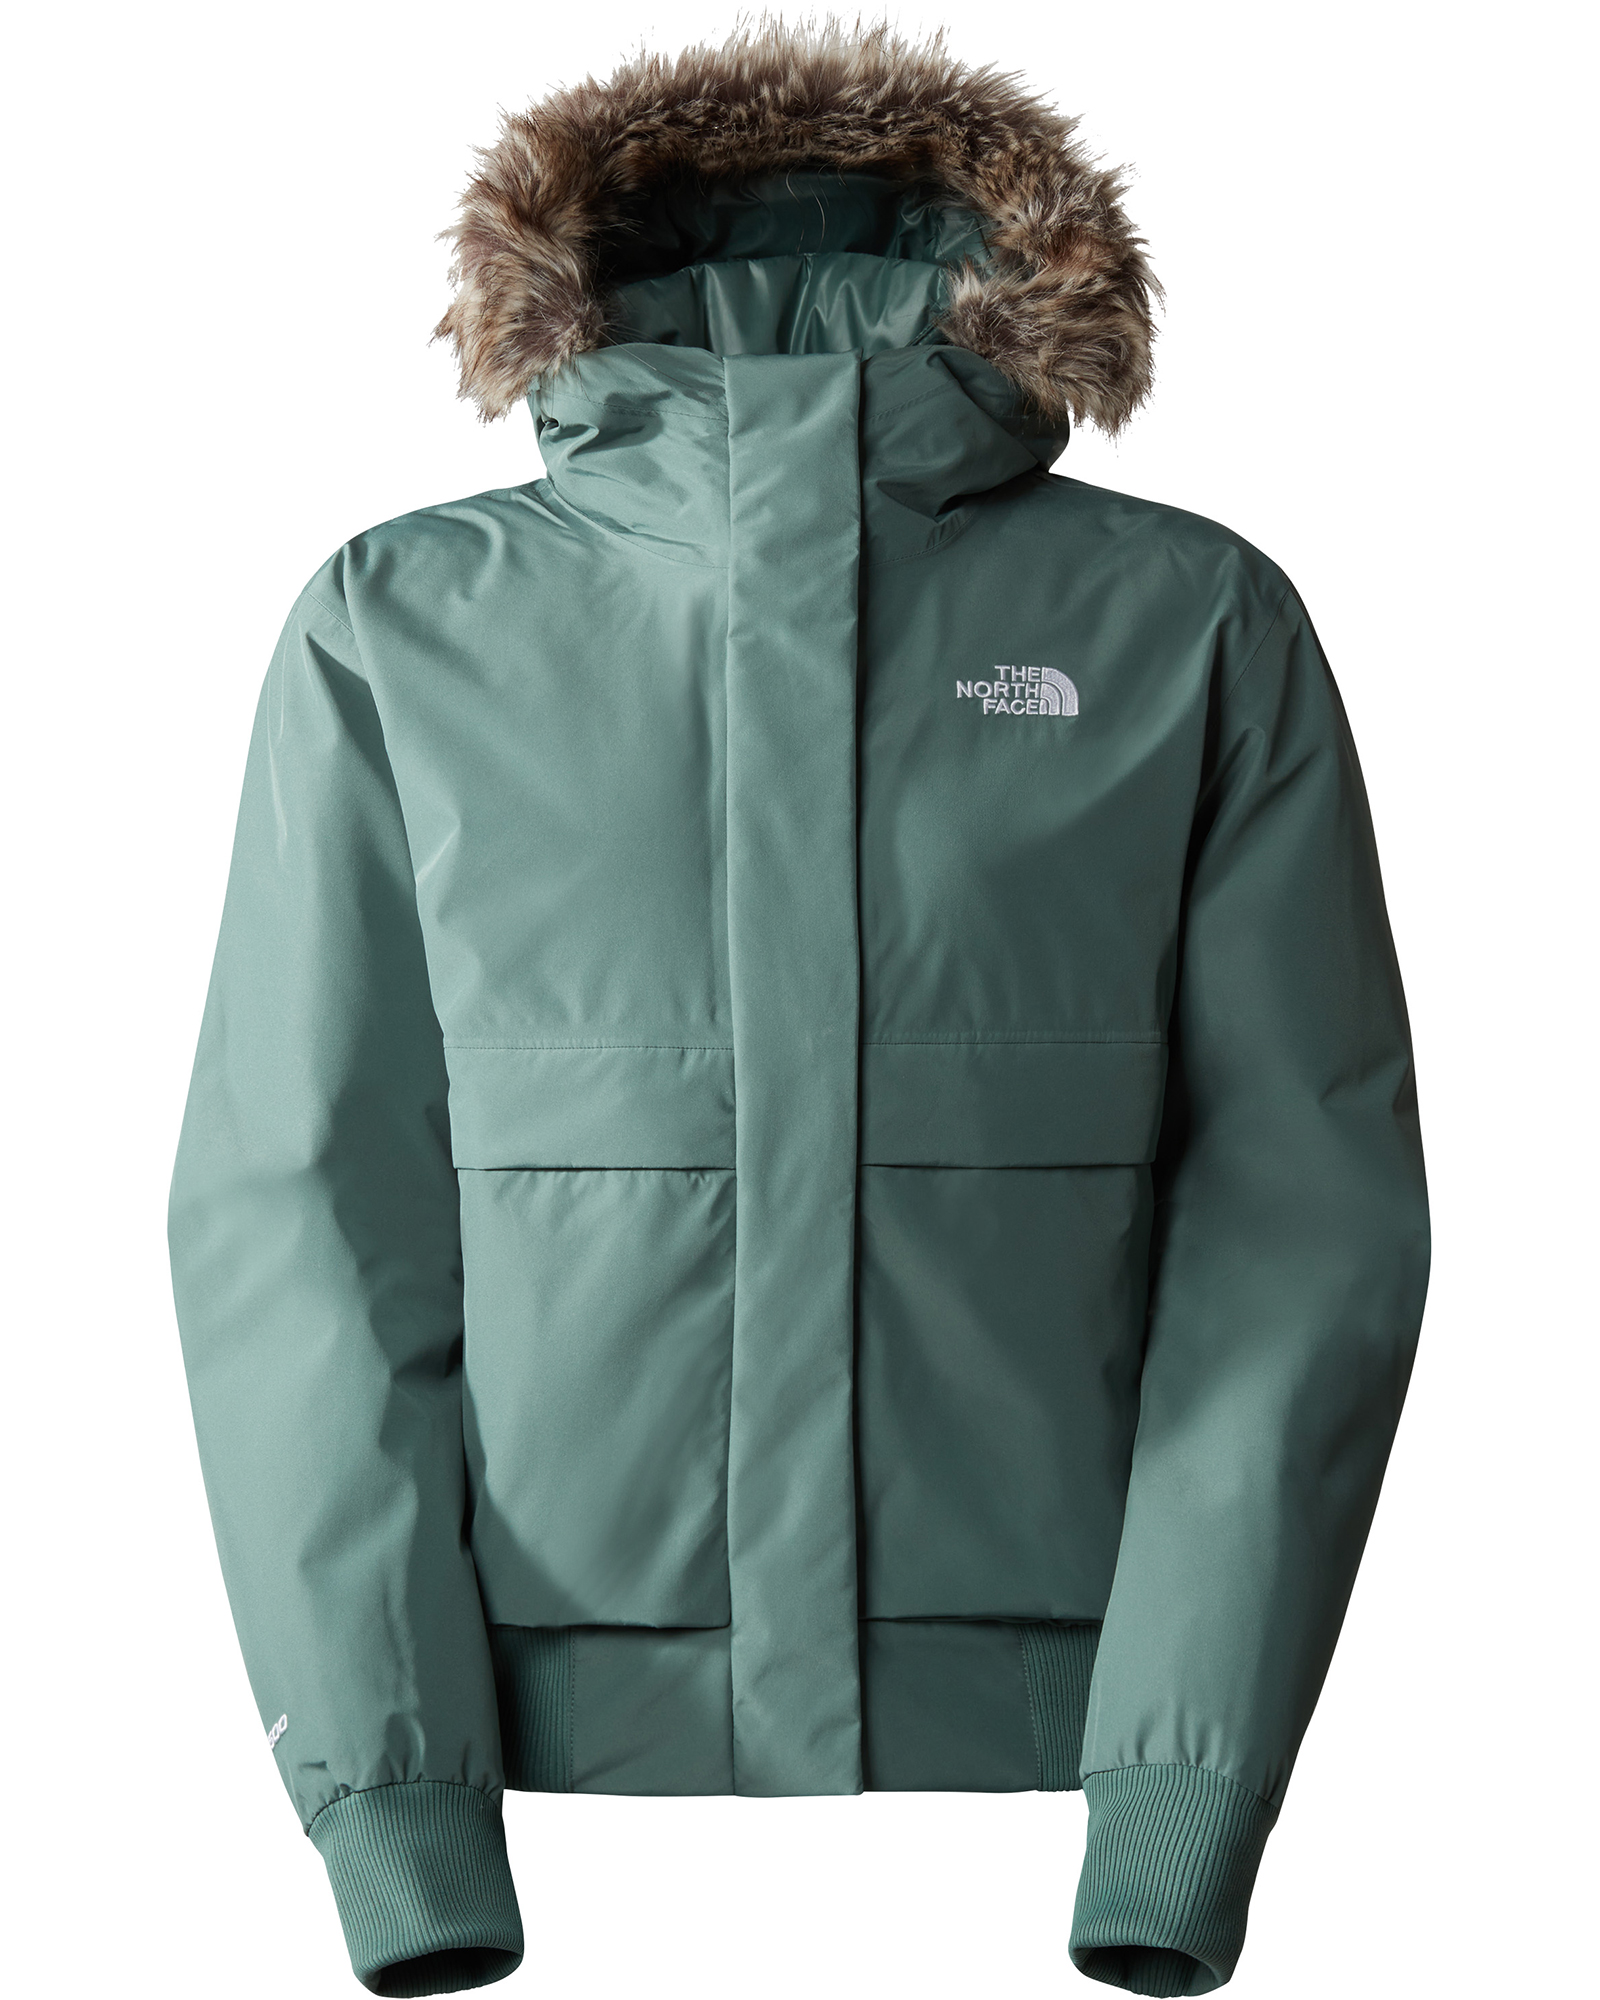 The North Face Women’s Arctic Bomber Down Jacket - Dark Sage XS